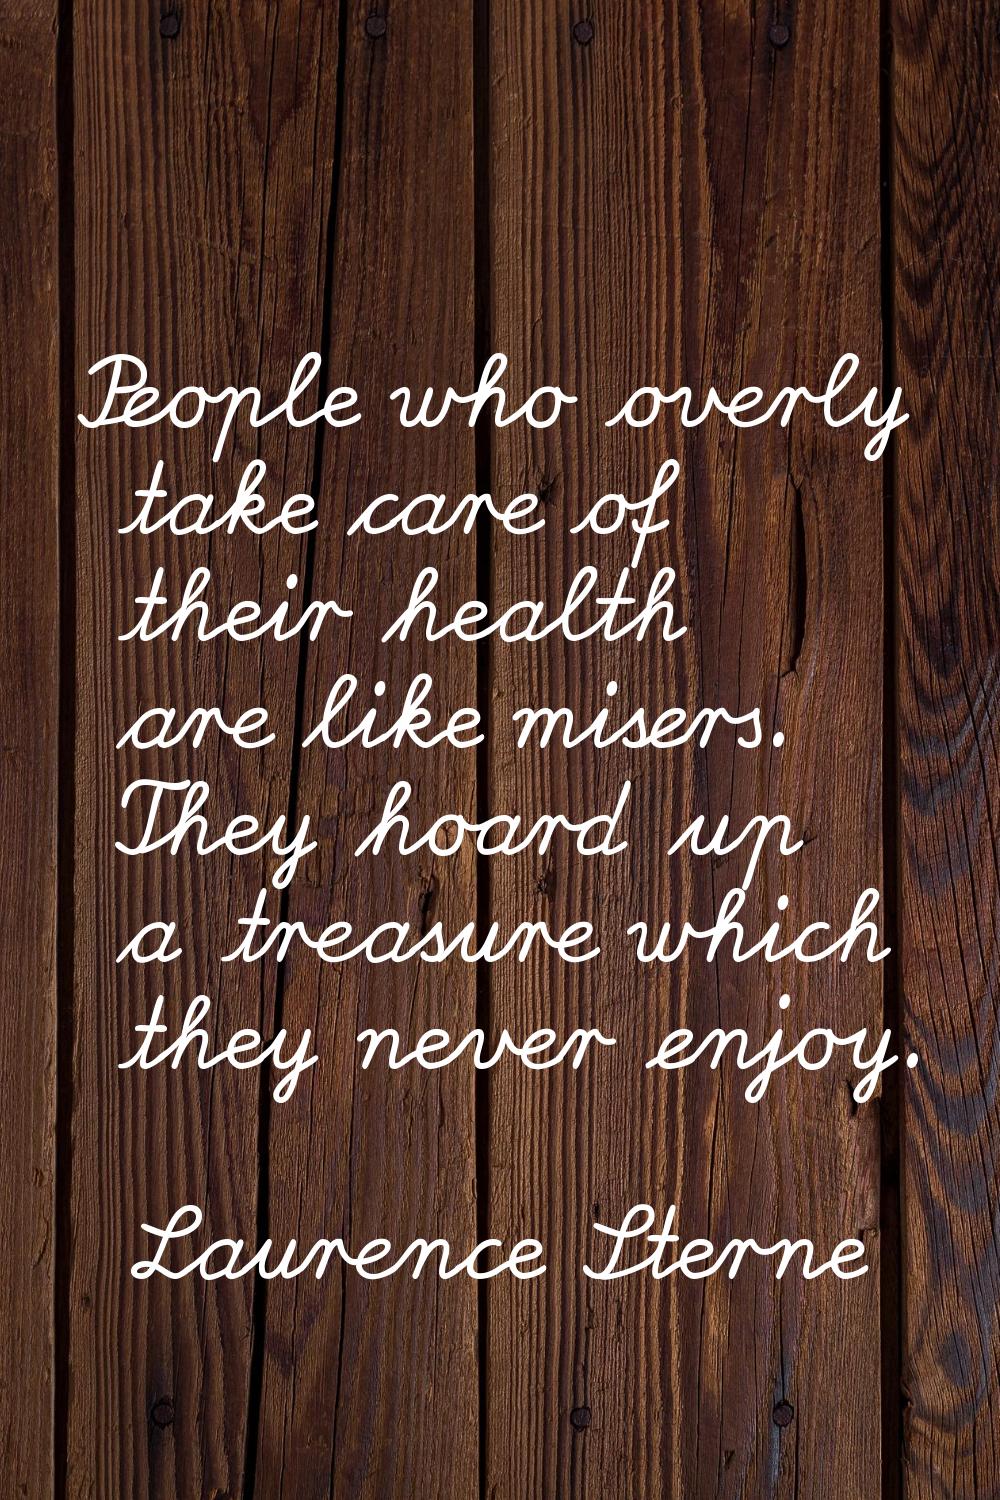 People who overly take care of their health are like misers. They hoard up a treasure which they ne